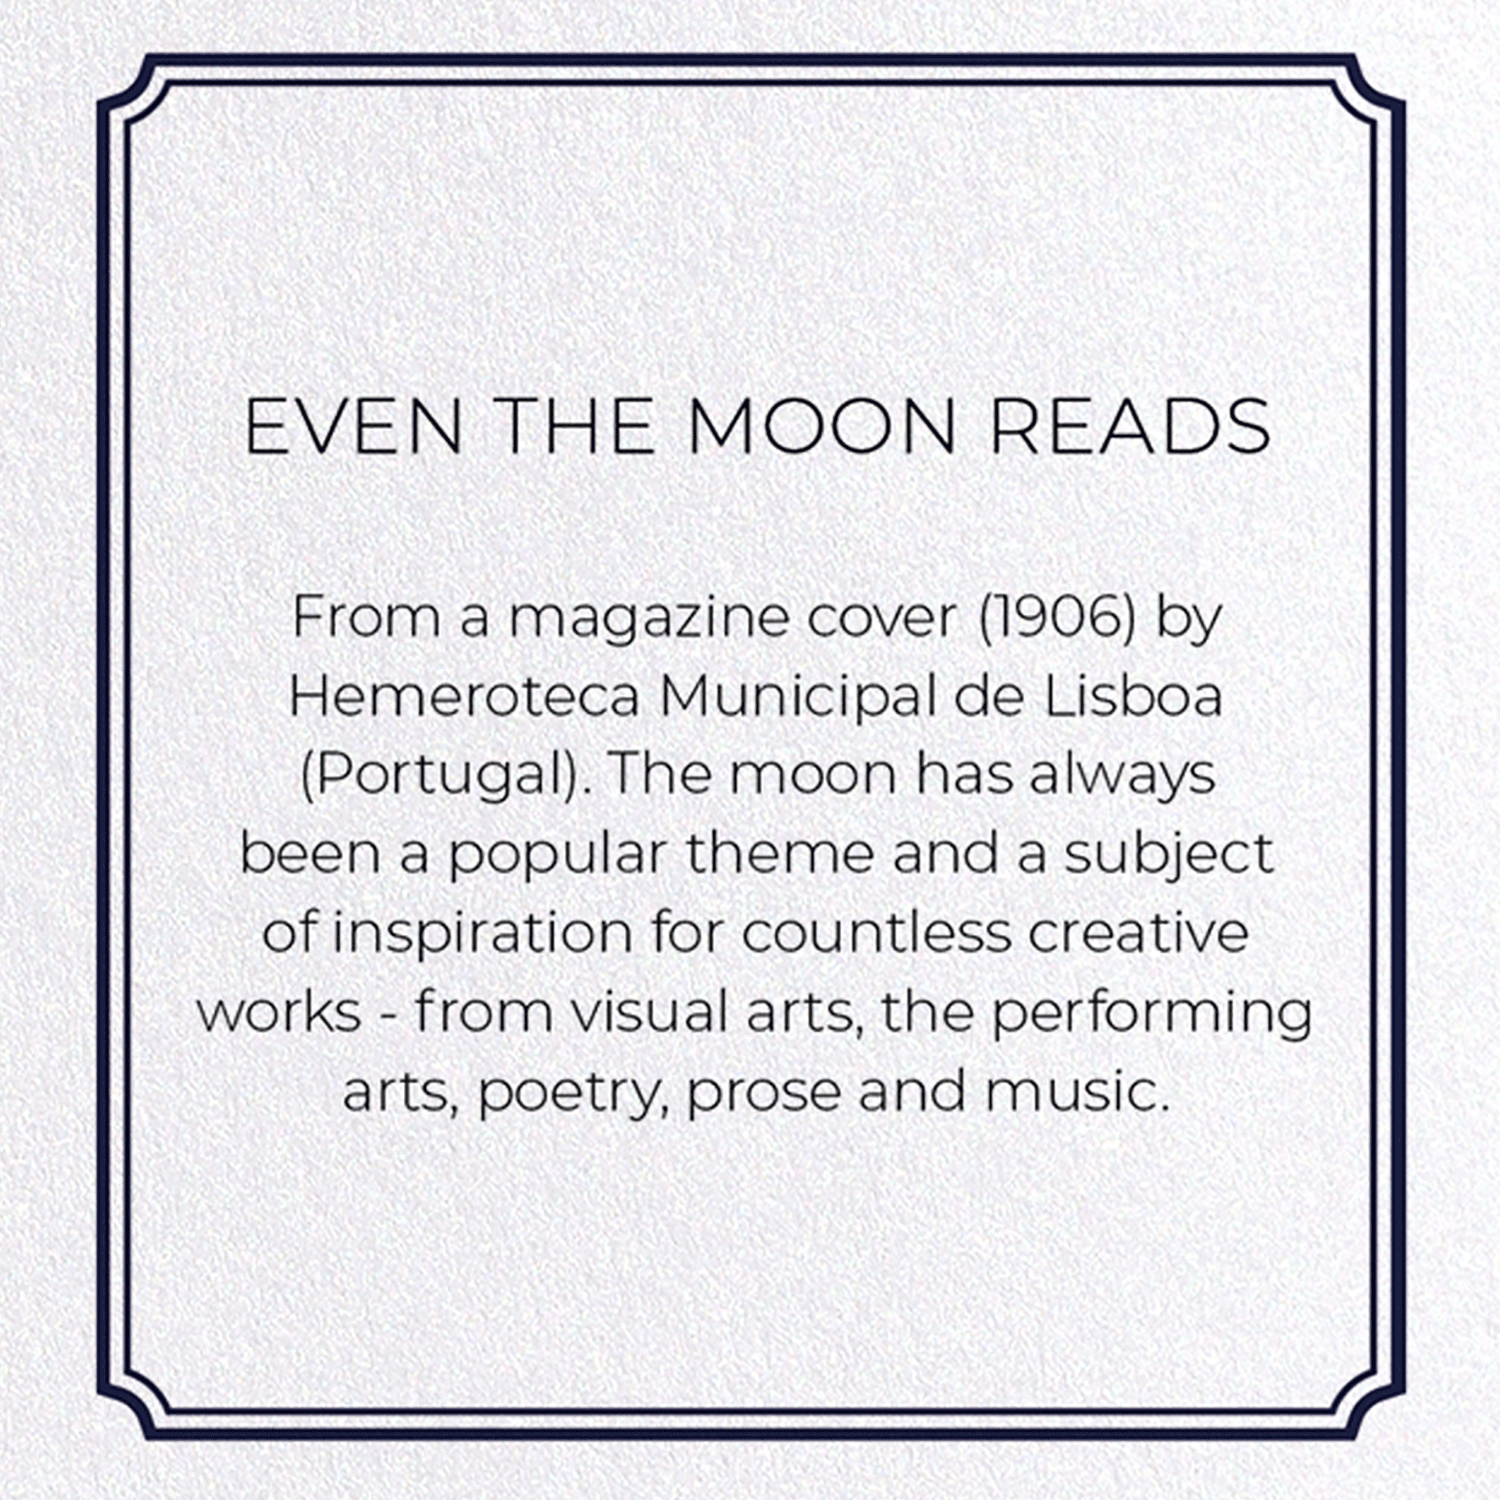 EVEN THE MOON READS